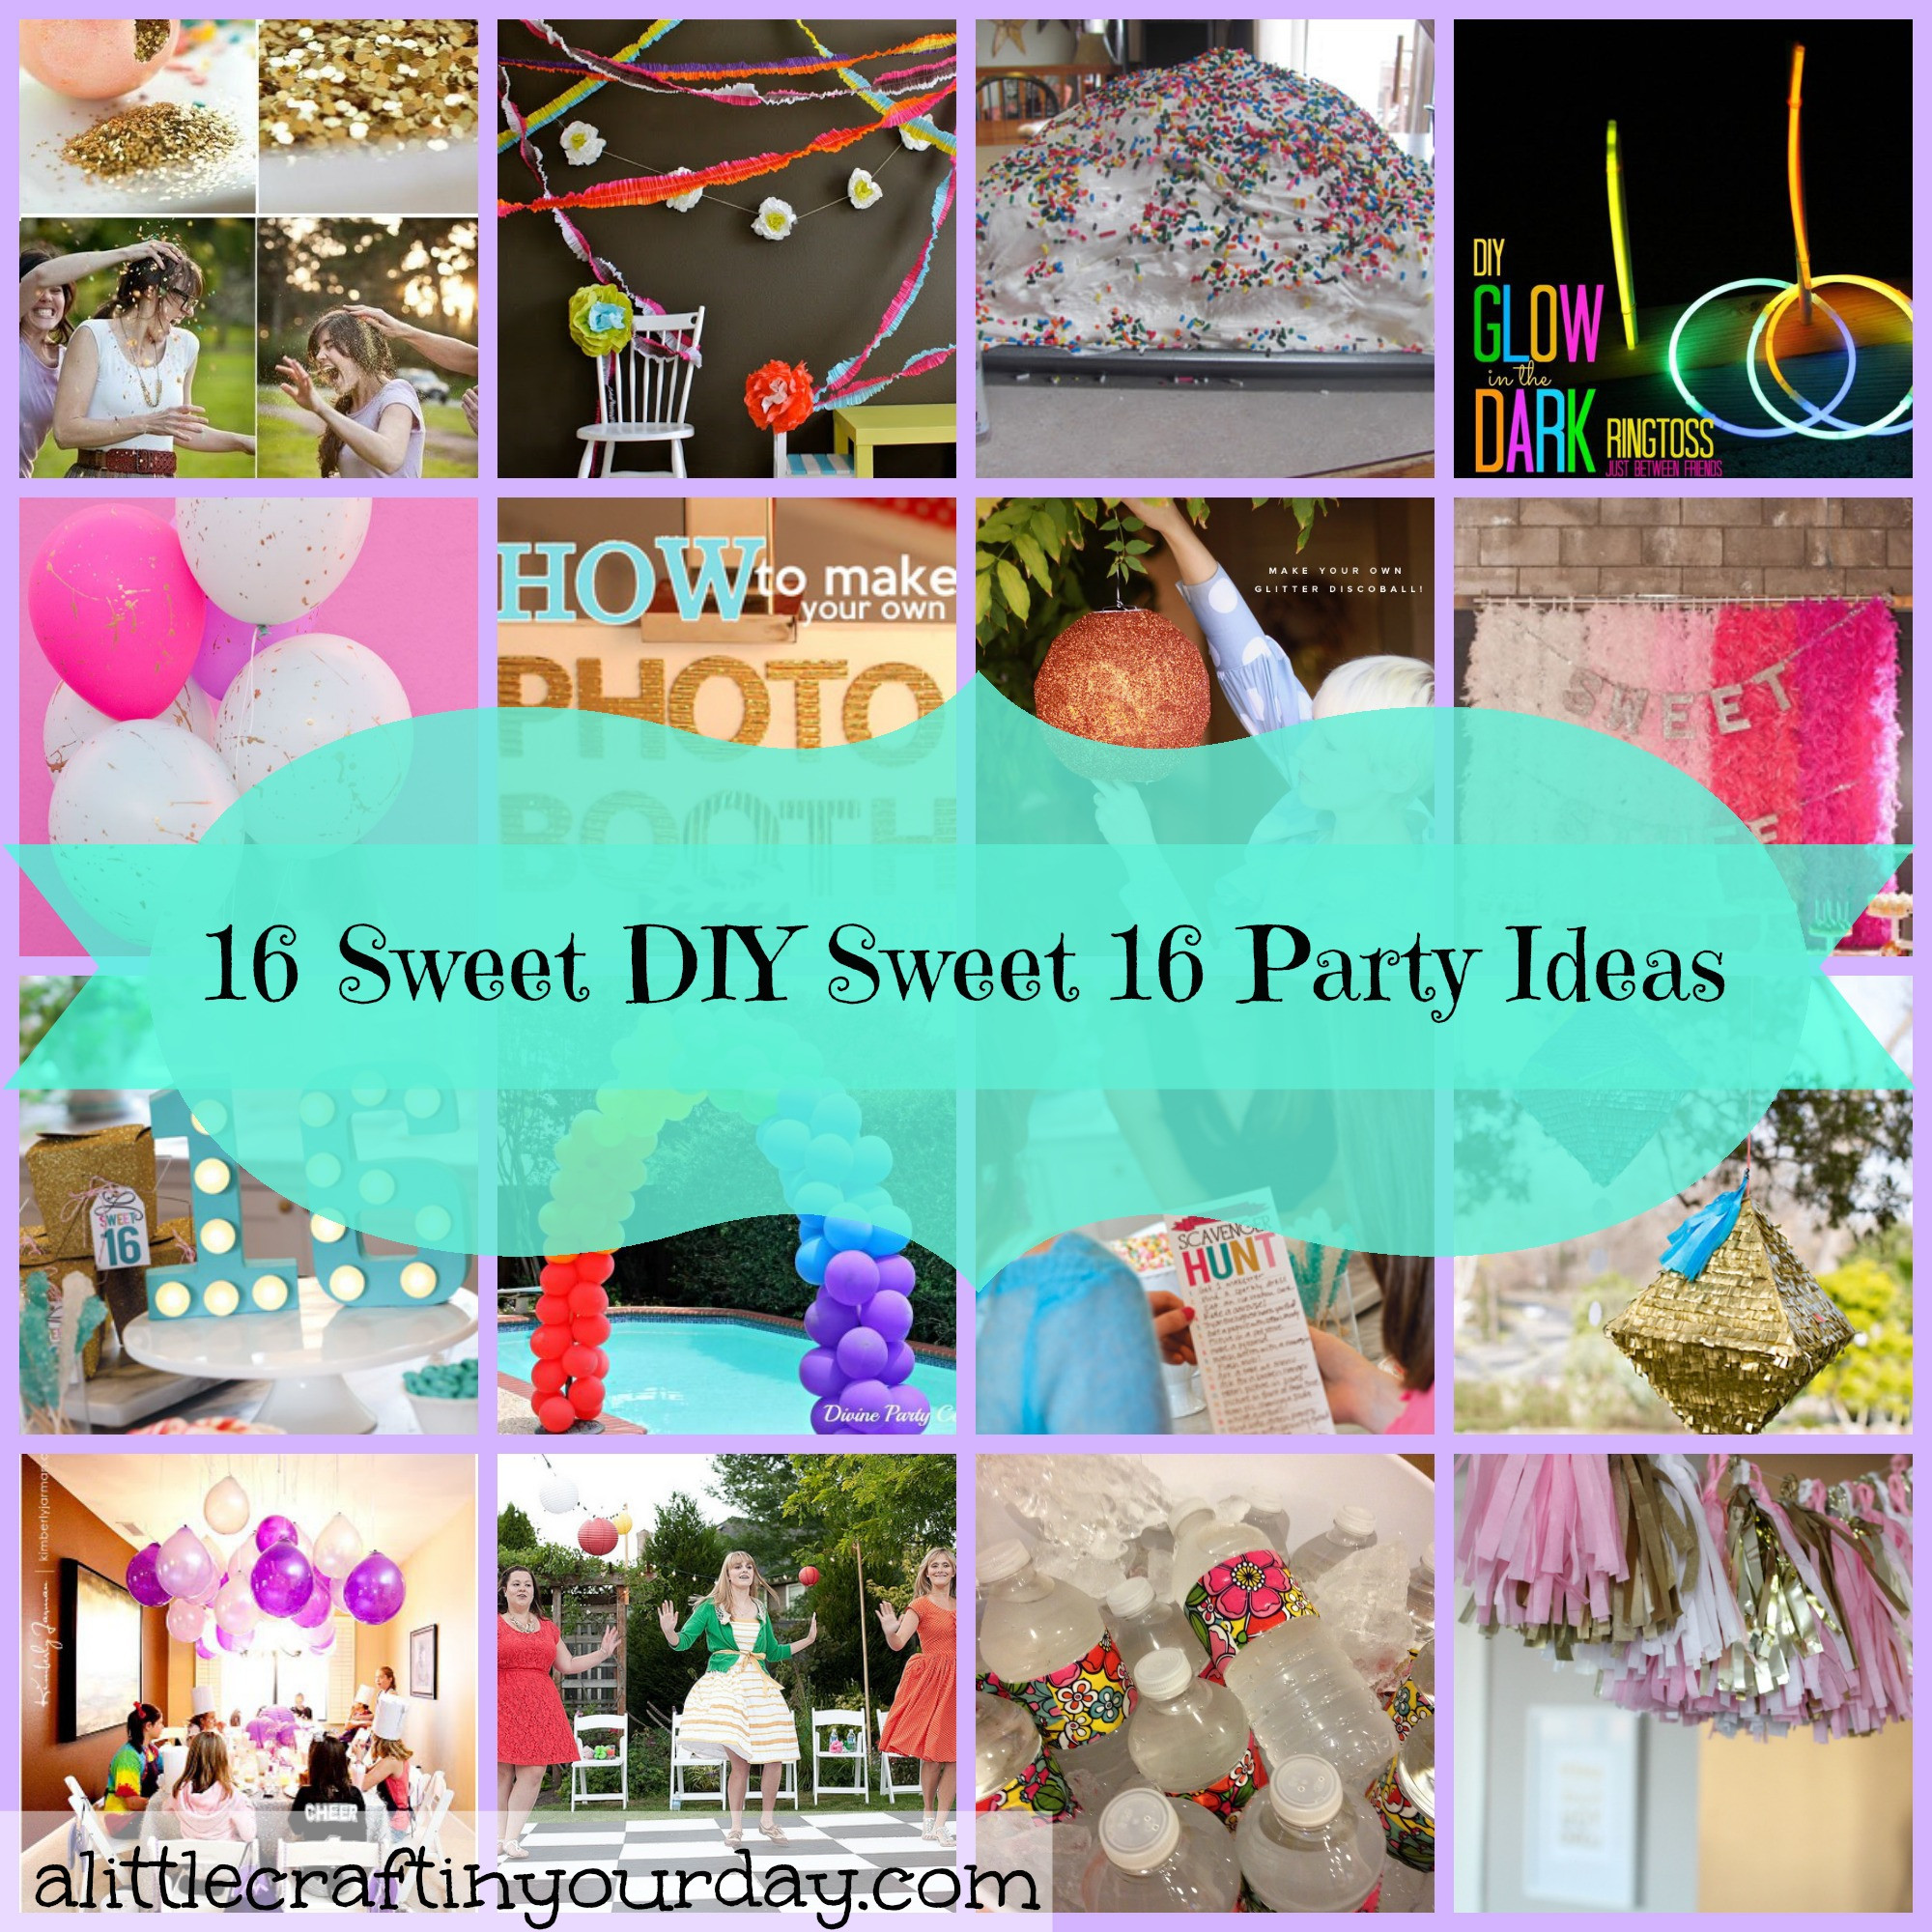 Sweet Sixteen Party Ideas For Summer
 Sweet Sixteen Party Ideas to Favor